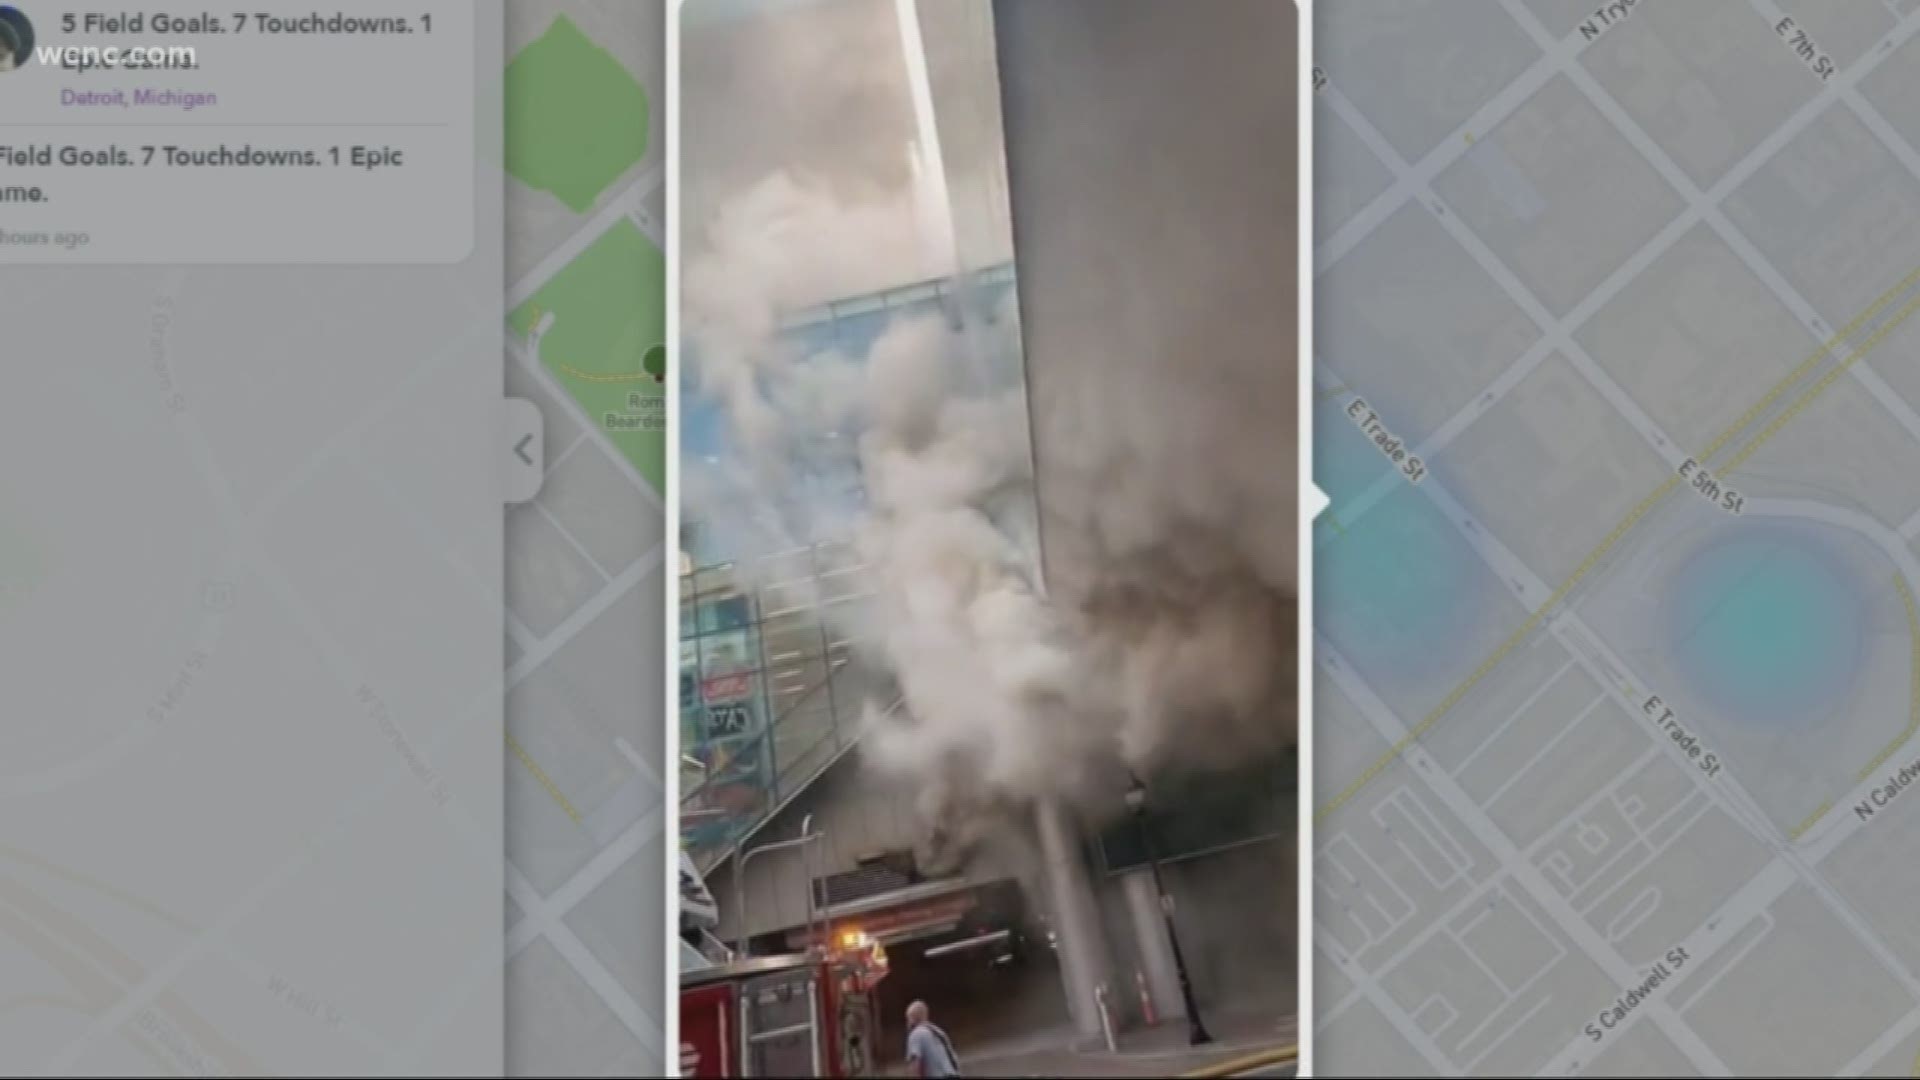 Smoke could be seen pouring from an air vent near the Bank of America parking deck.